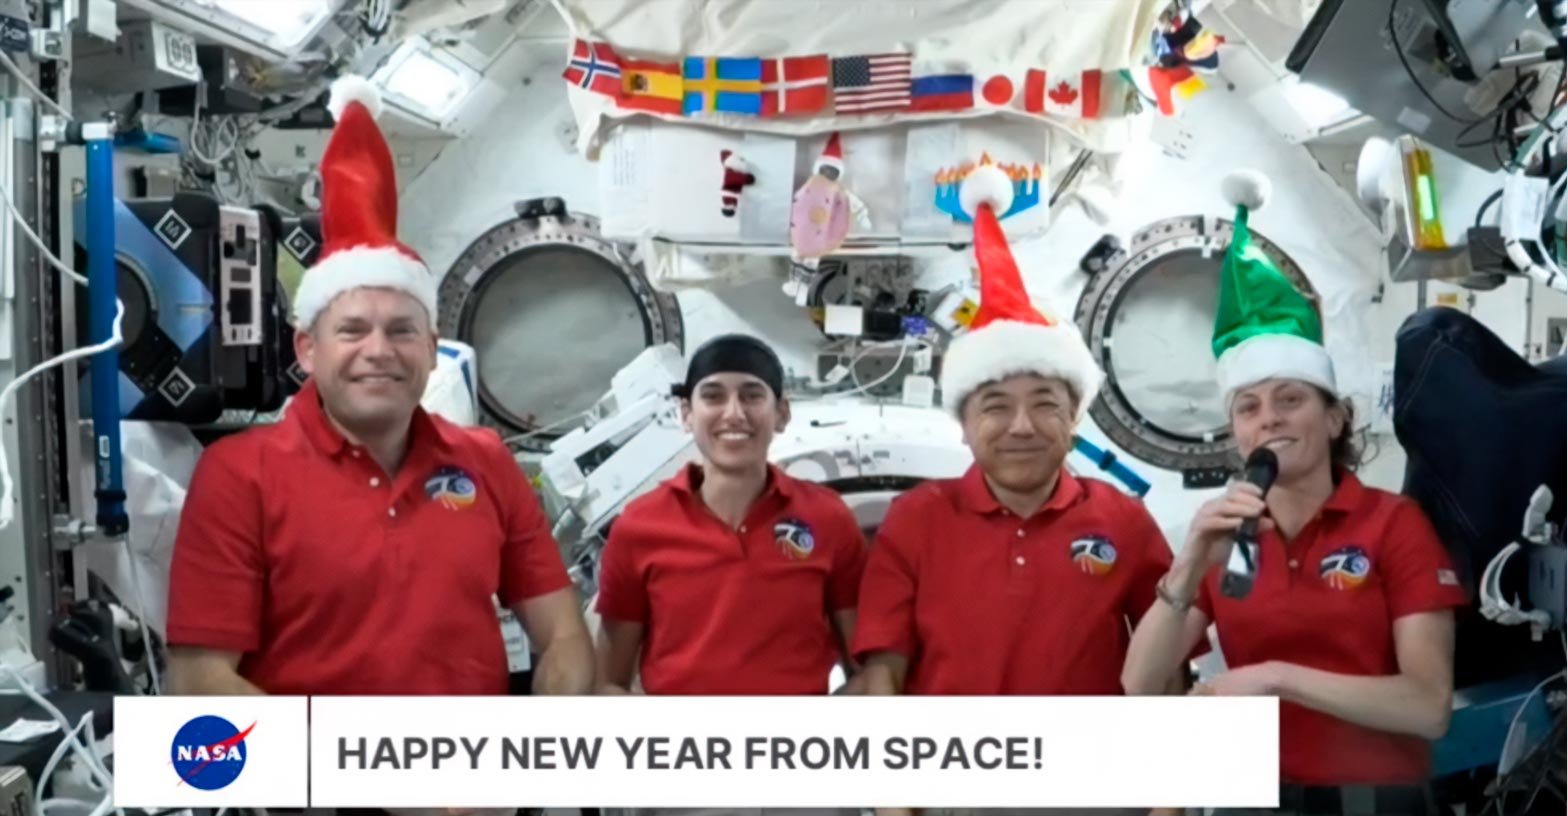 Space Station Crew Members Kick-Start New Year With Advanced Science